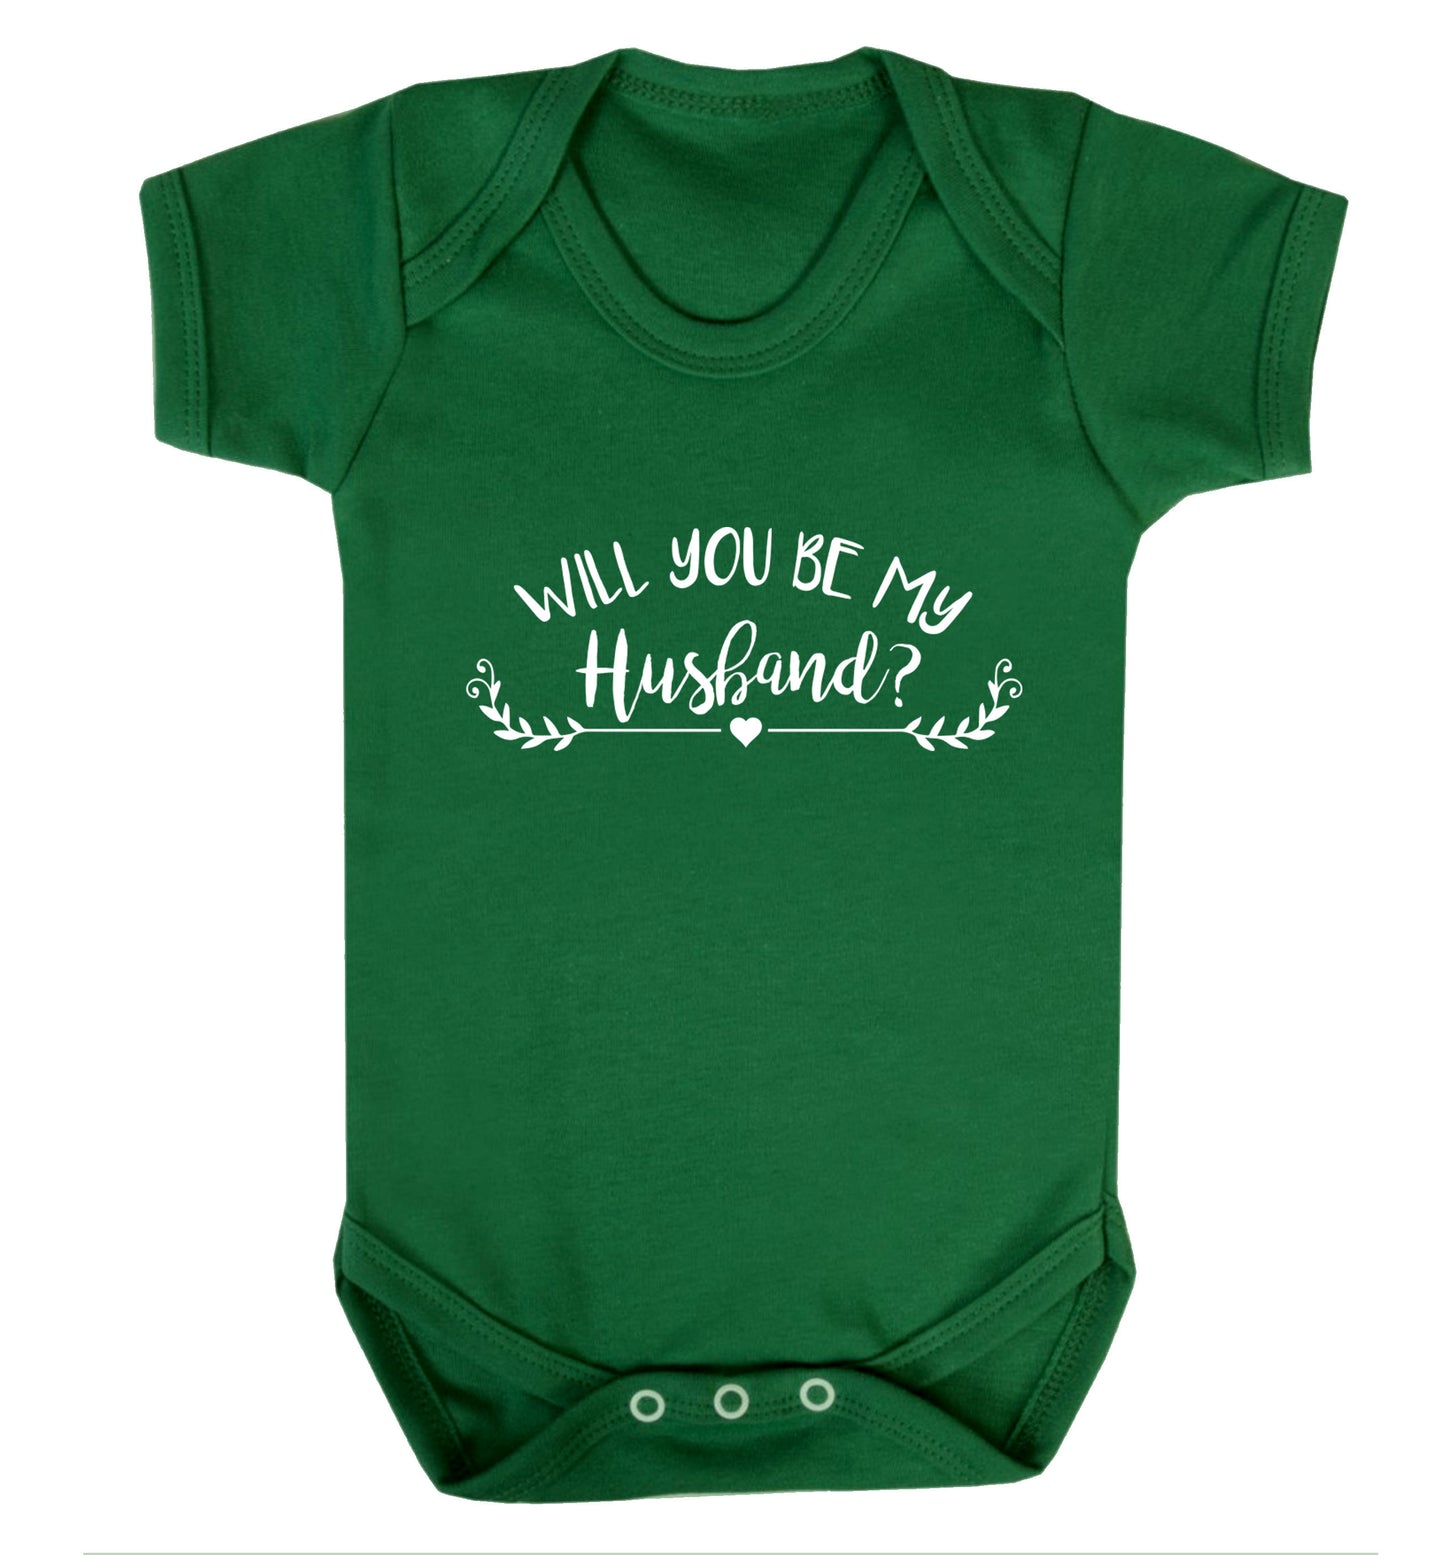 Will you be my husband? Baby Vest green 18-24 months